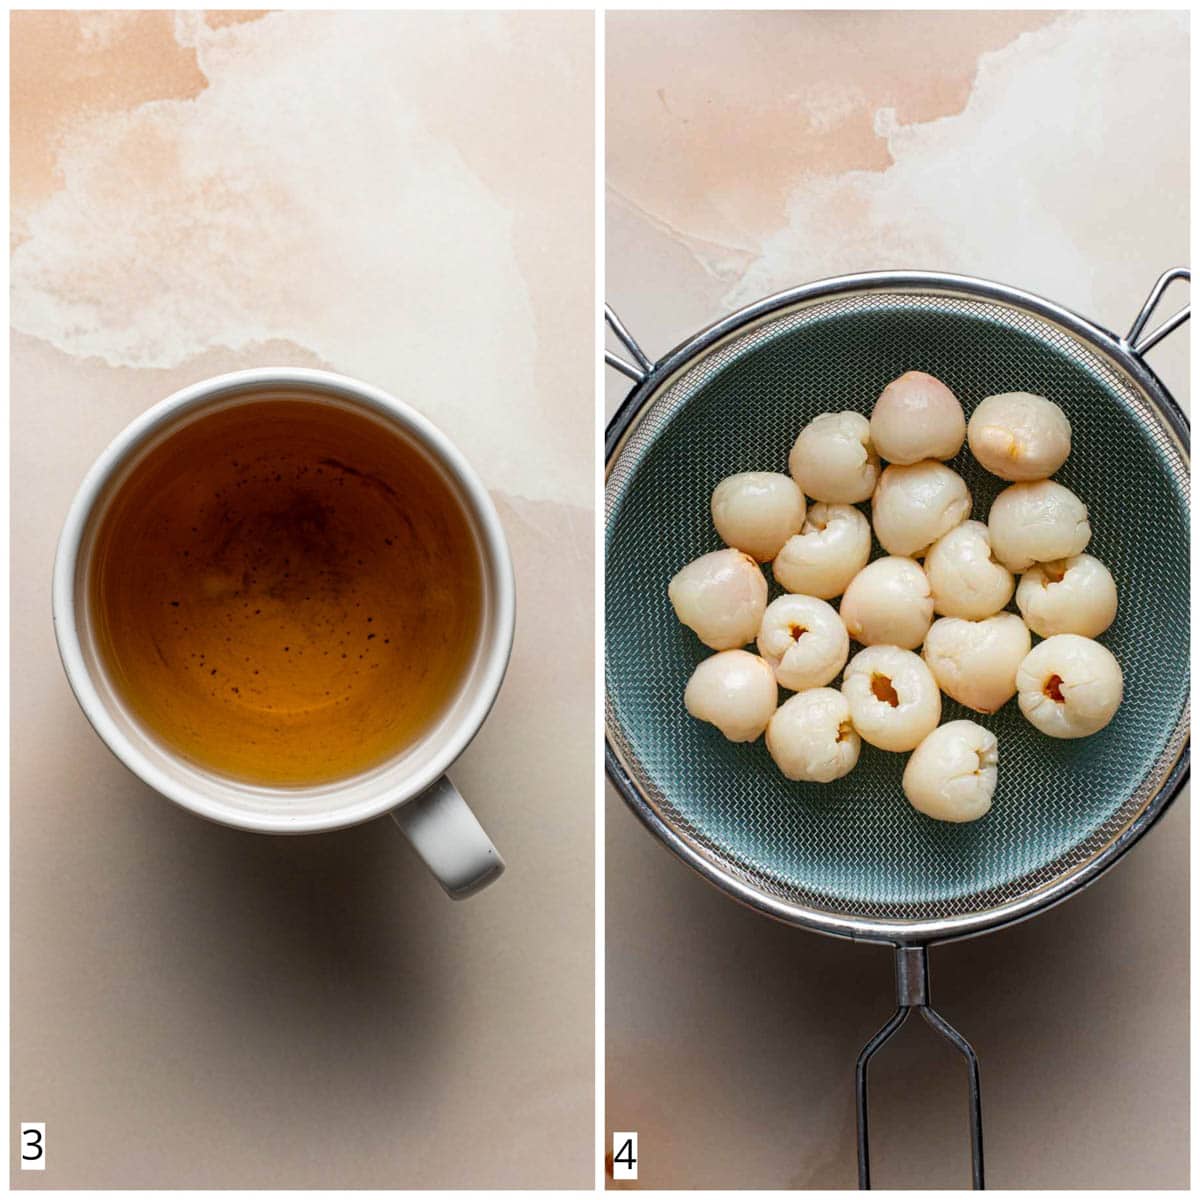 A collage of two images showing a mug of tea and canned lychee fruit. 